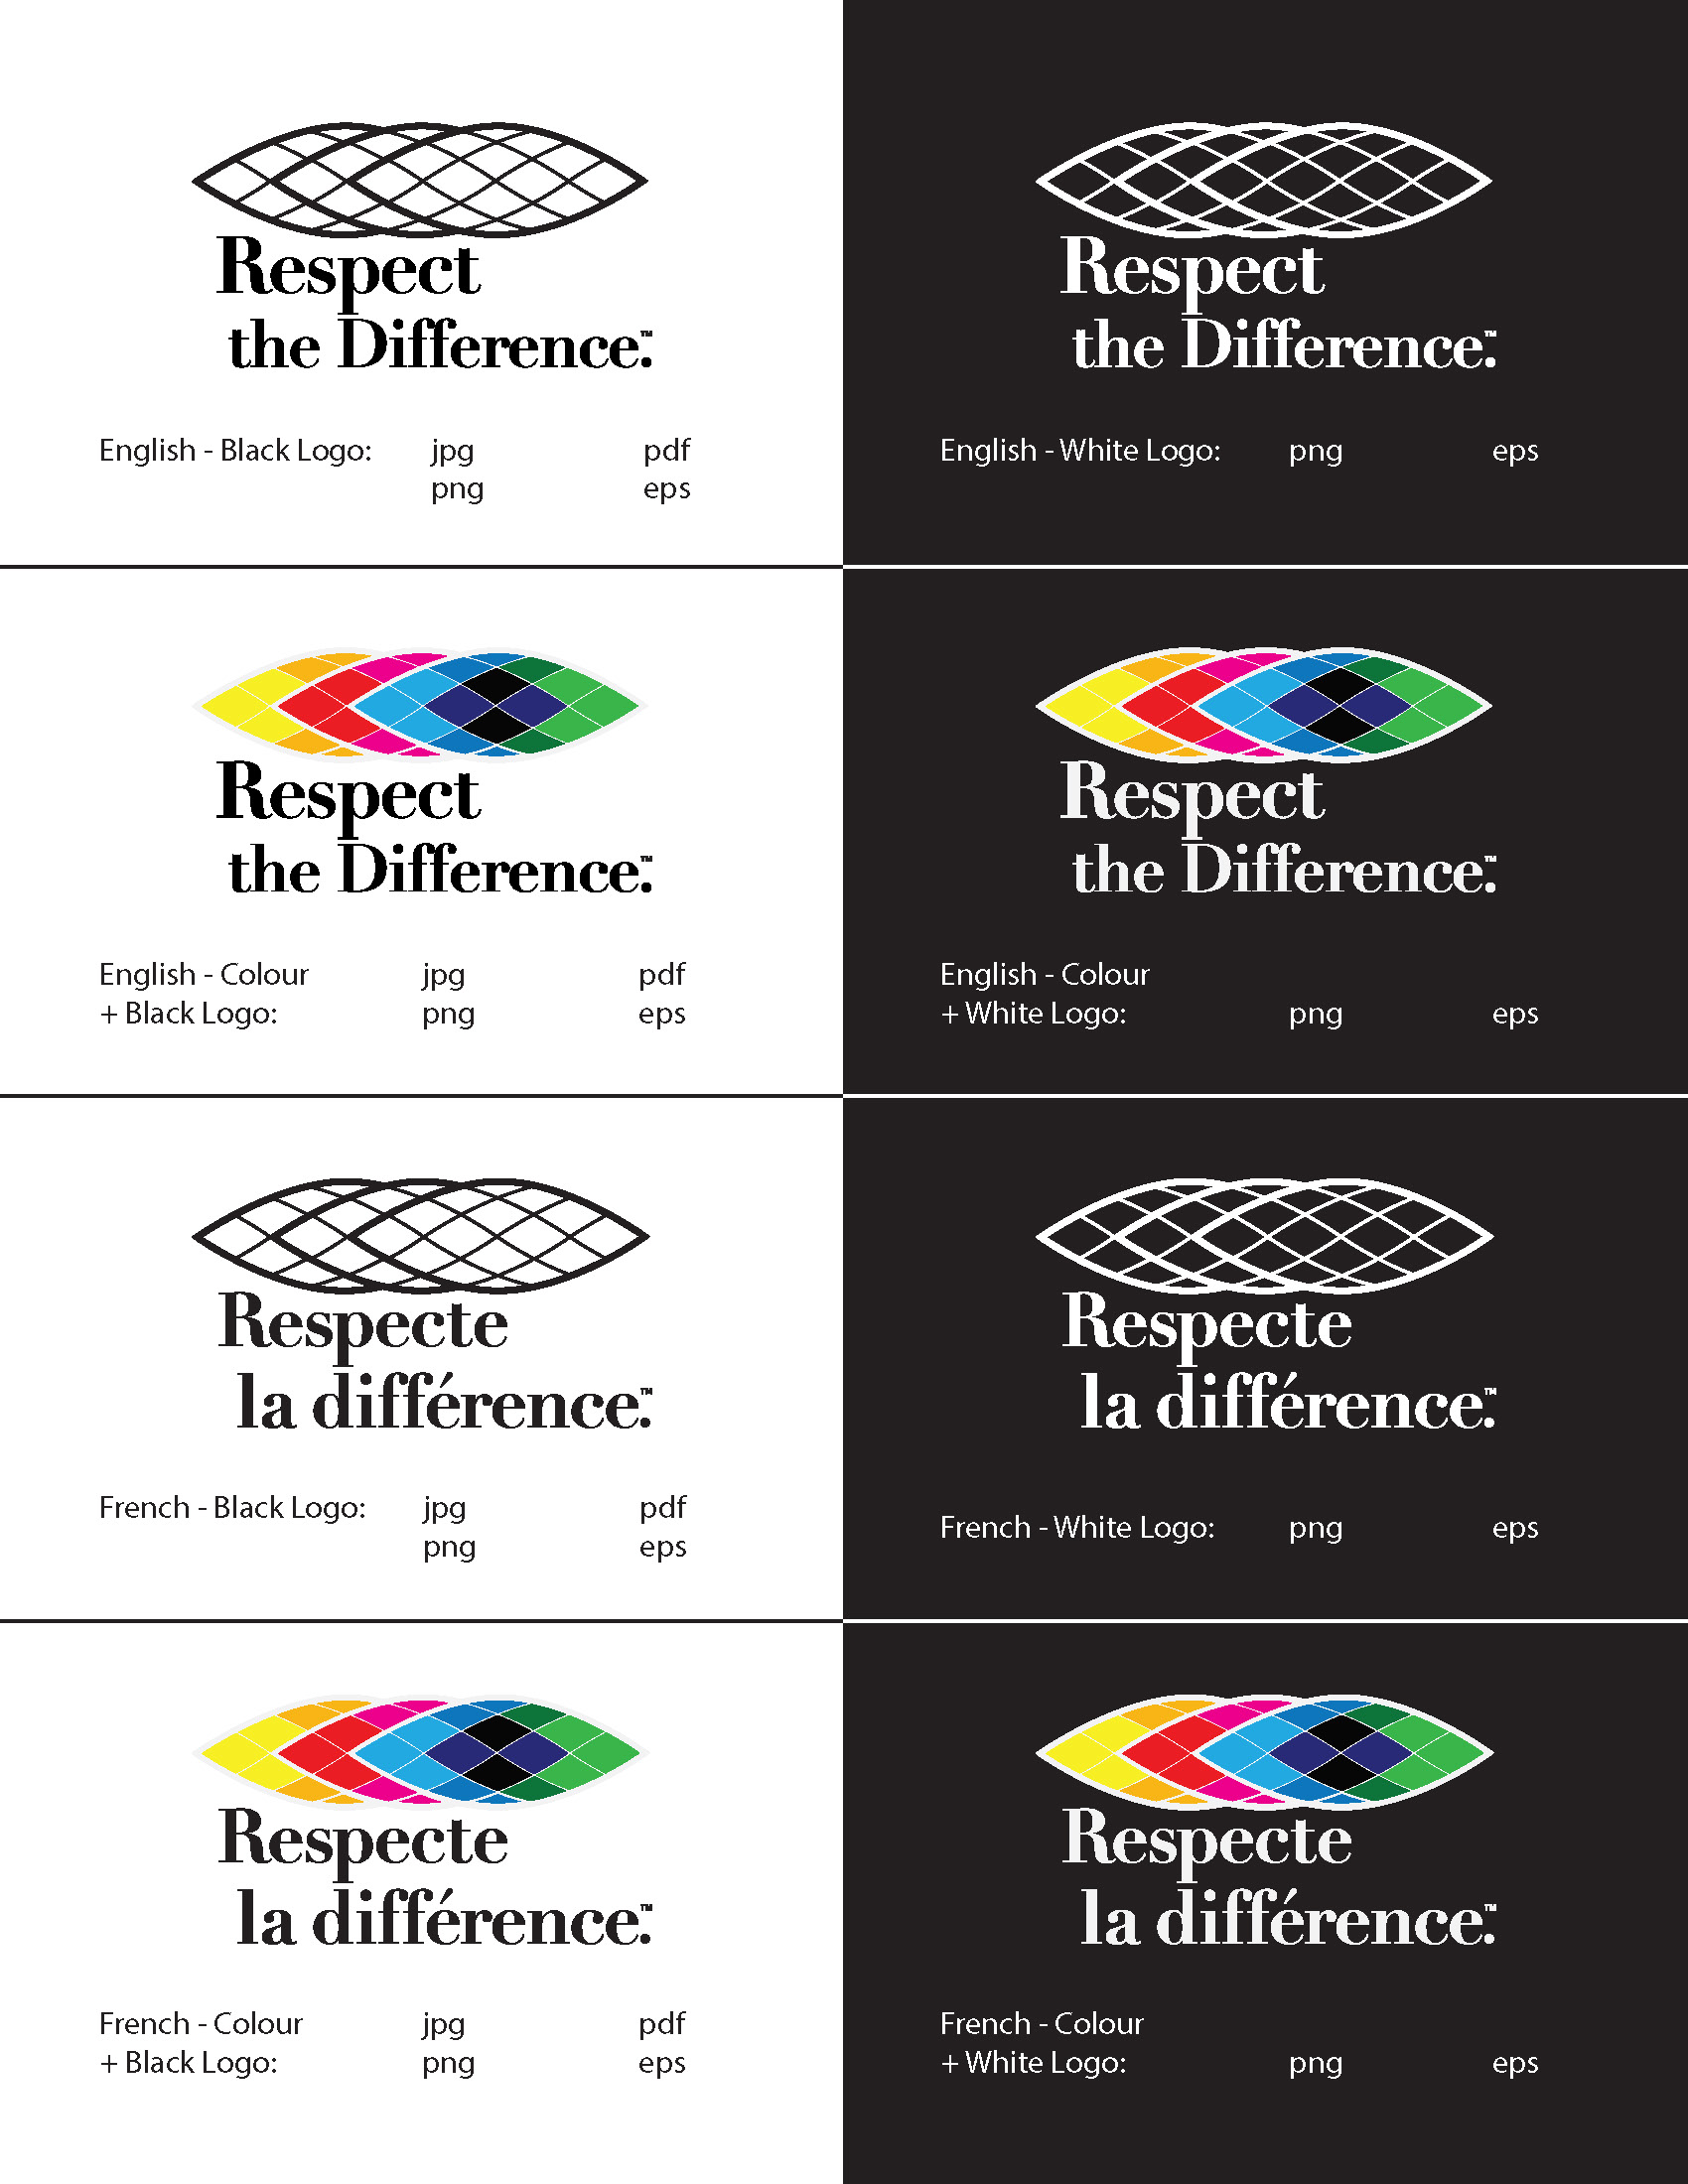 Respect the Difference logos